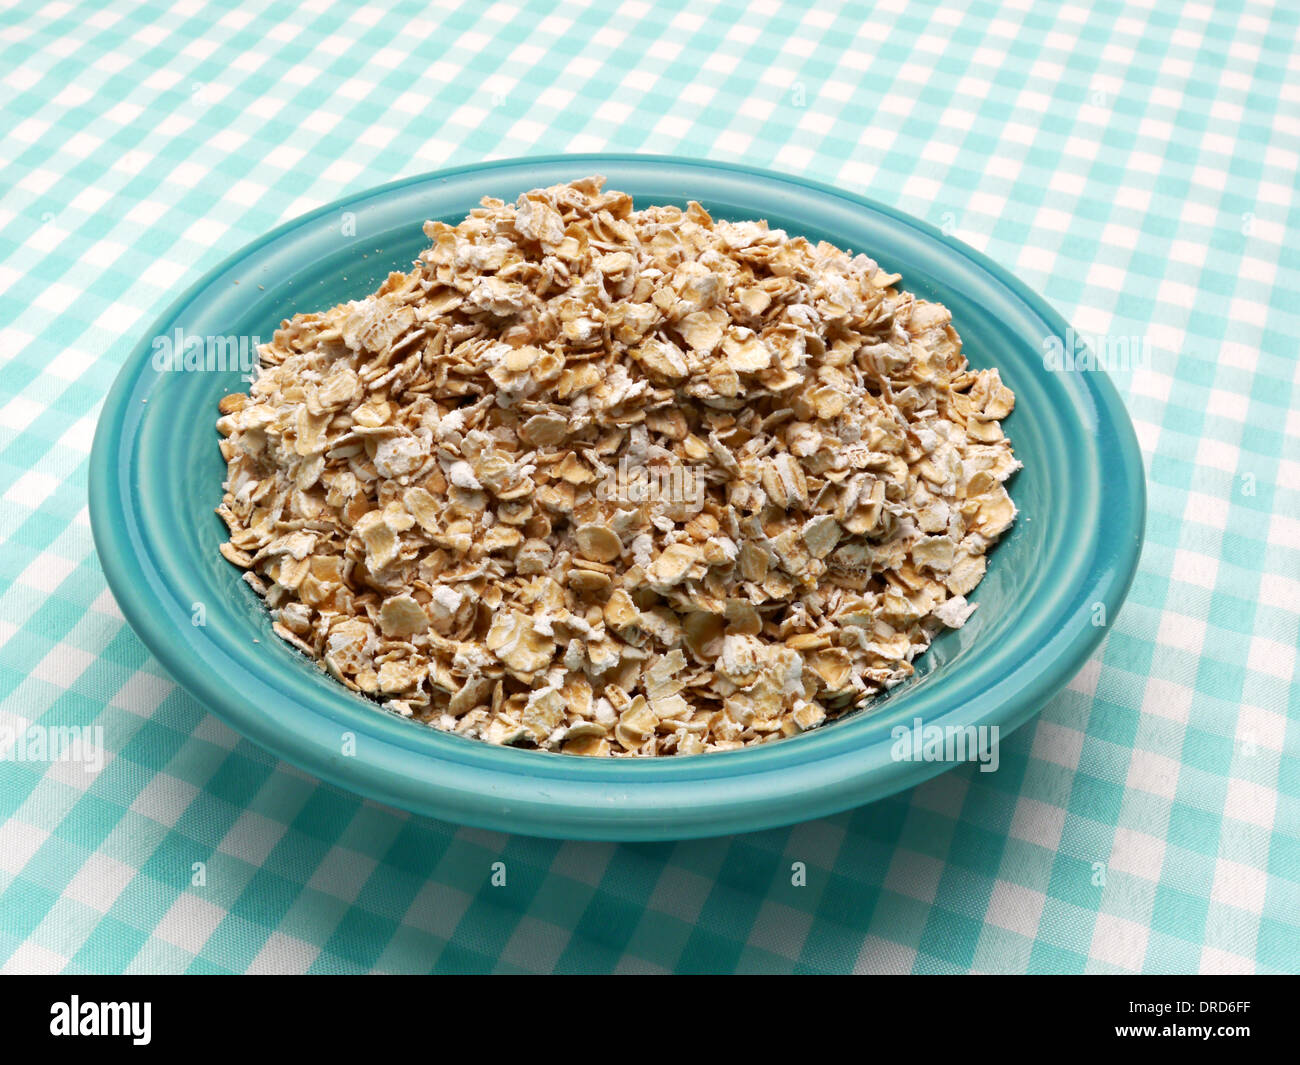 Uncooked oatmeal is sitting in a blue bowl on a blue and white checked table cloth. Stock Photo